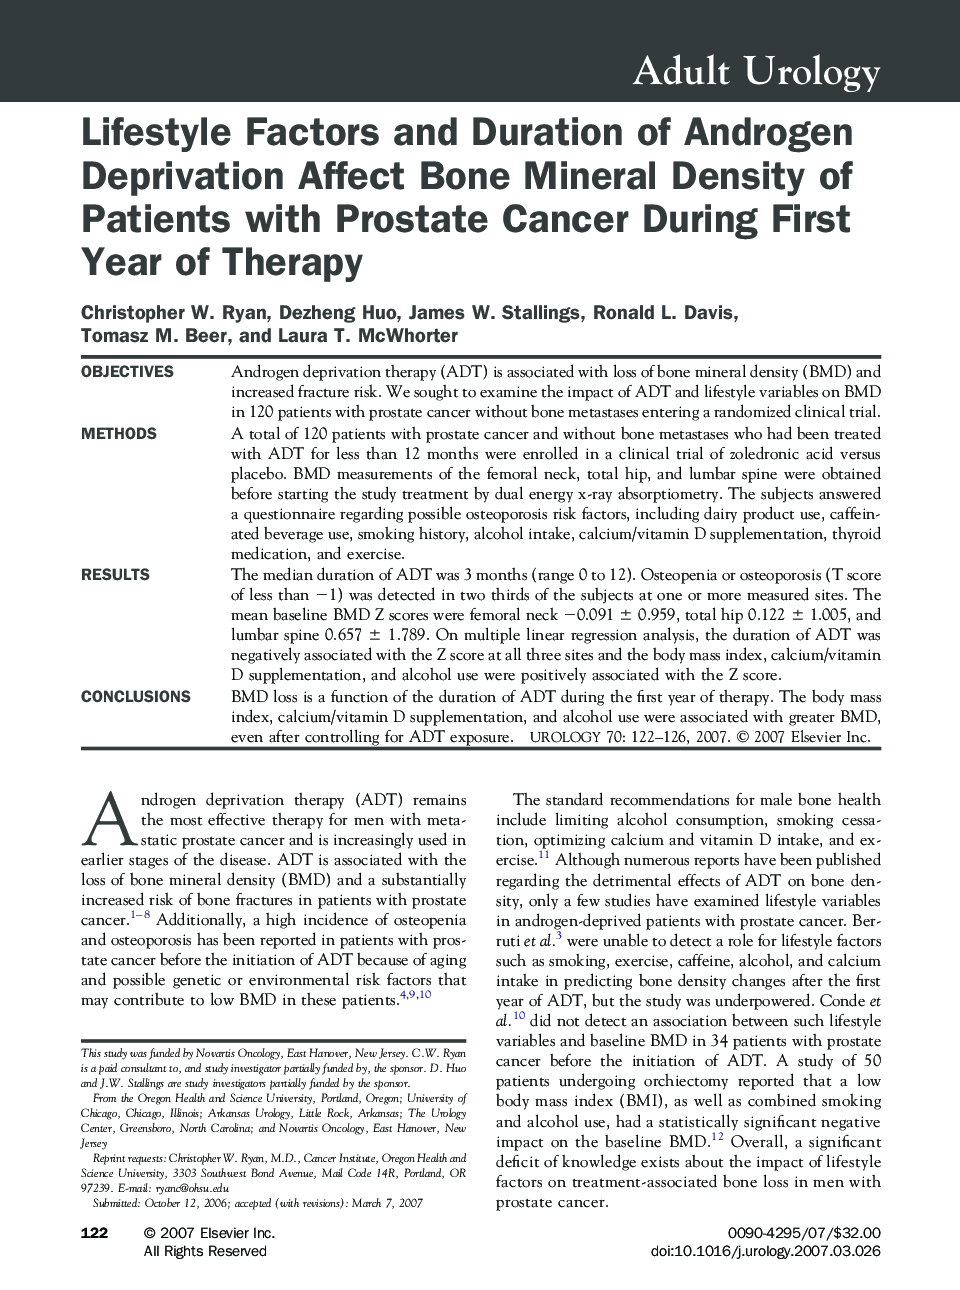 Lifestyle Factors and Duration of Androgen Deprivation Affect Bone Mineral Density of Patients with Prostate Cancer During First Year of Therapy 